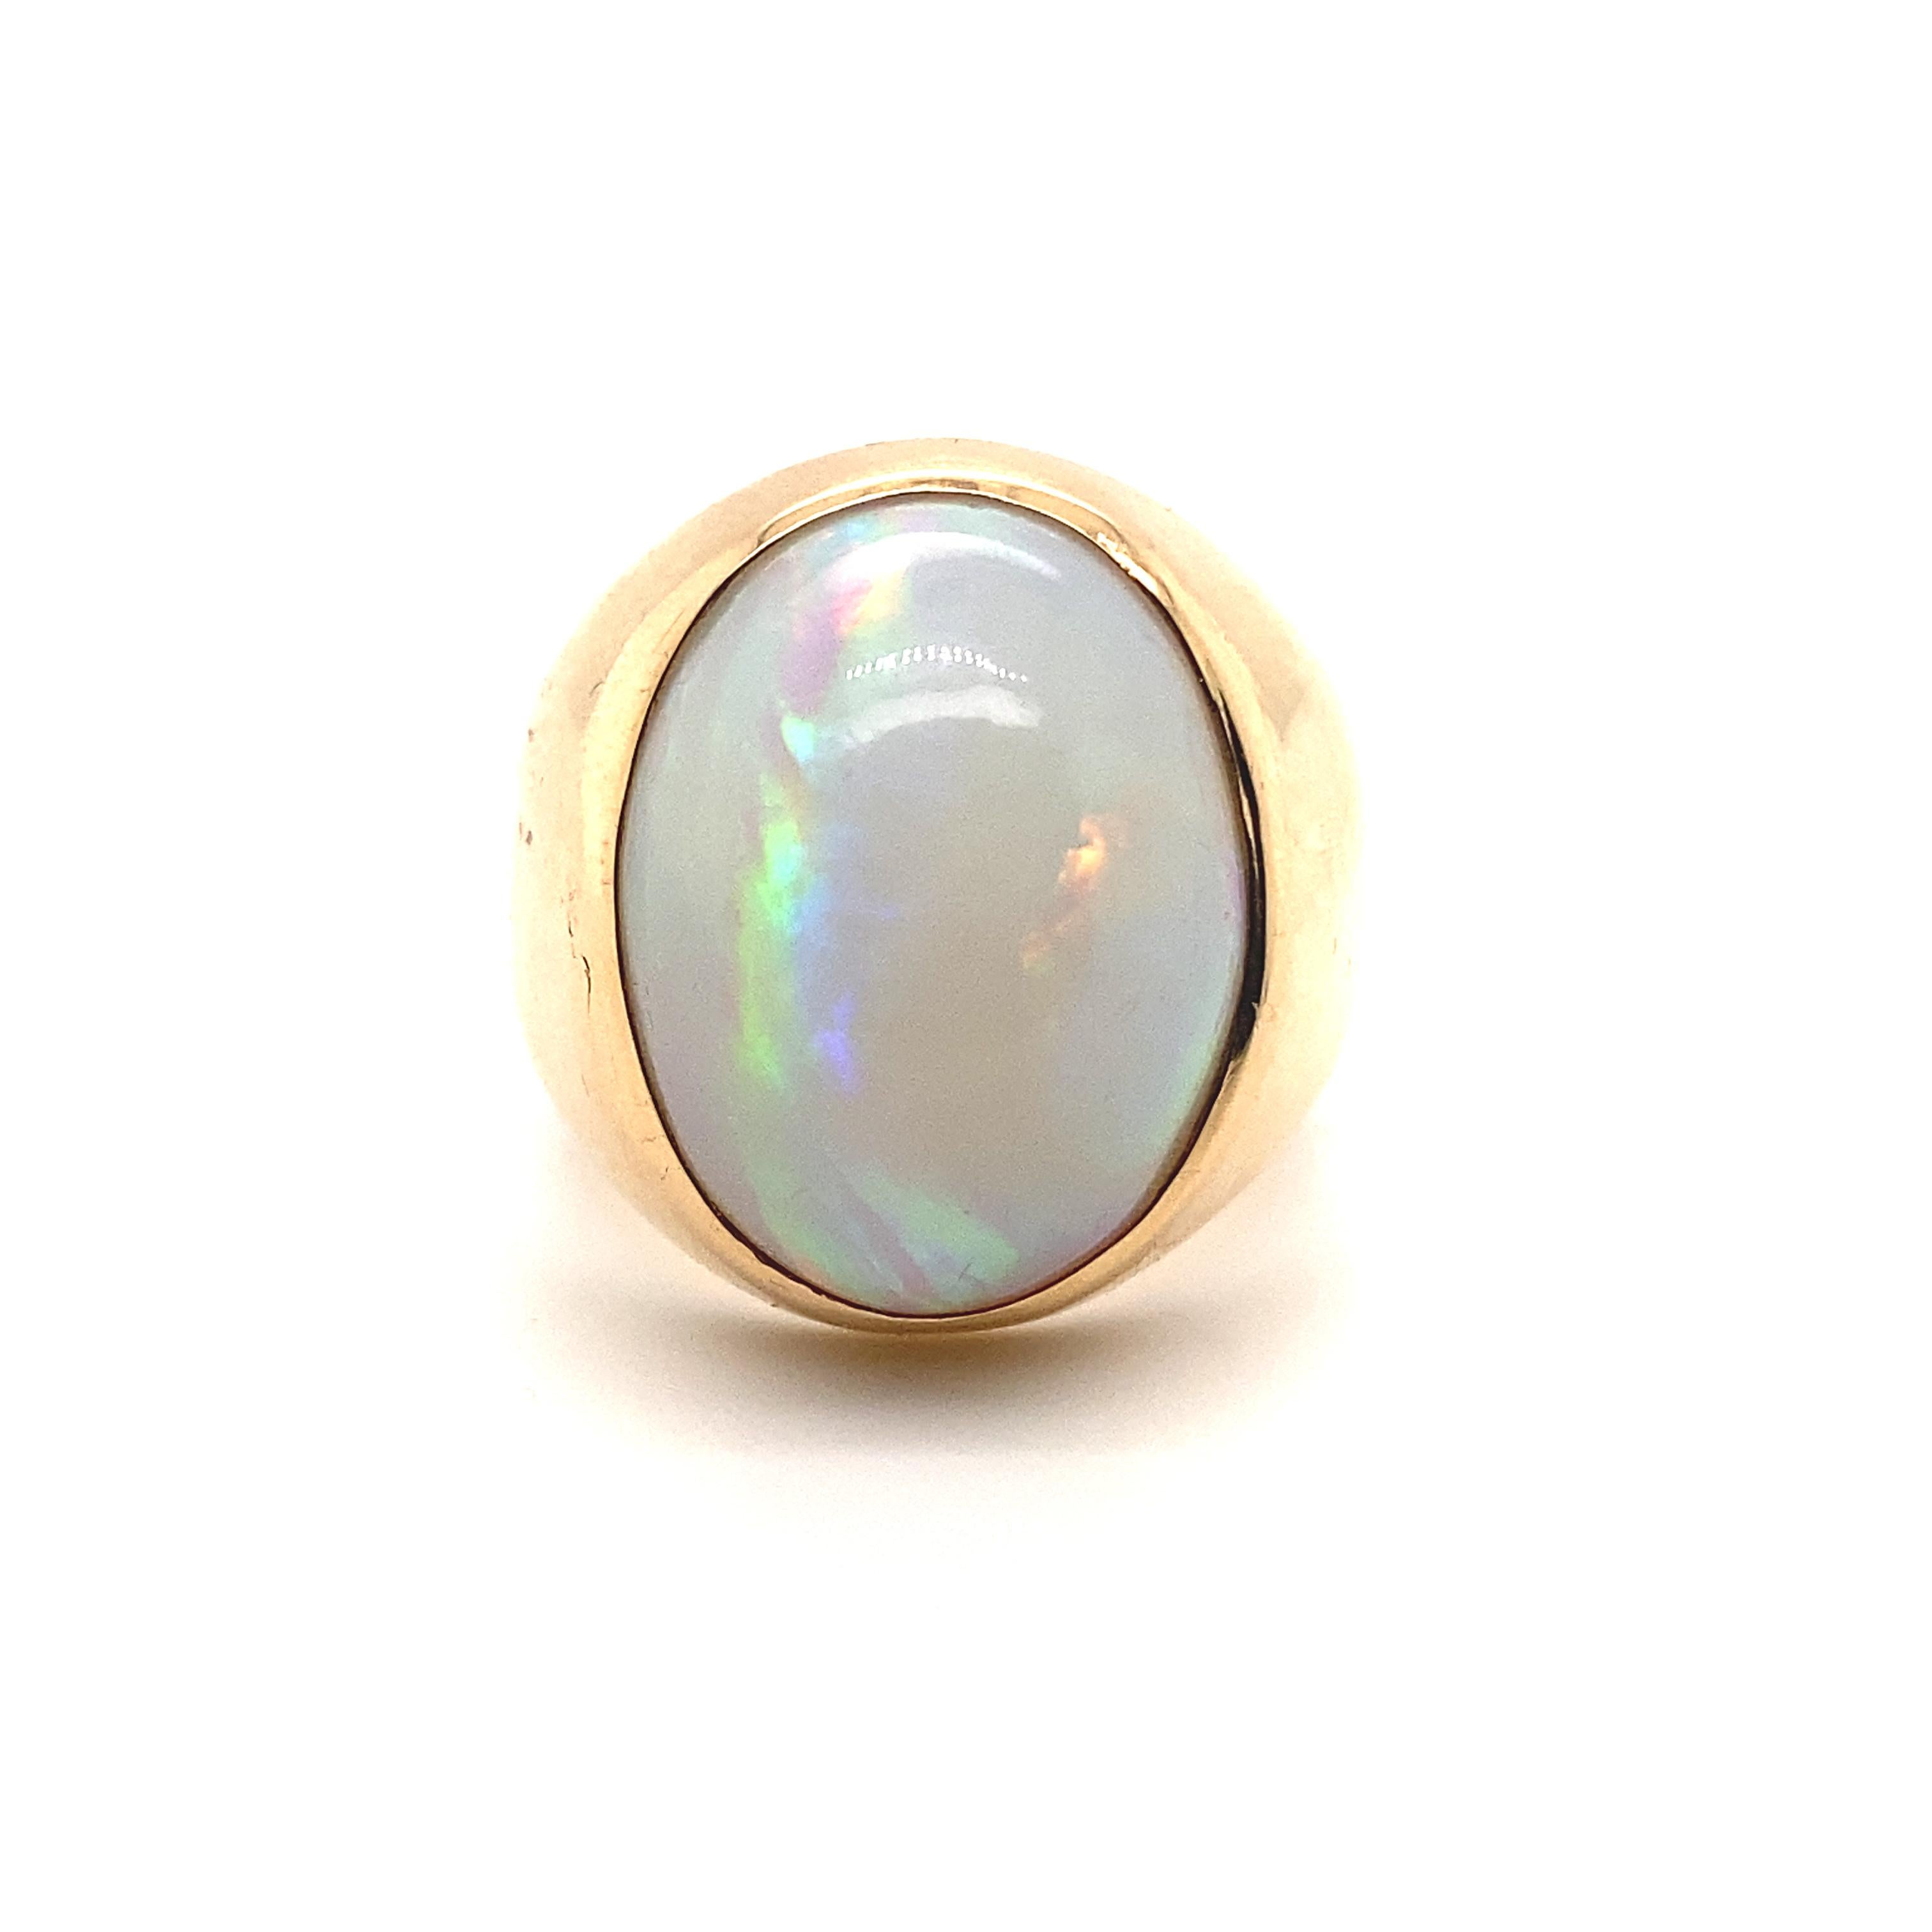 A vintage opal signet ring in 18 karat yellow gold, circa 1960.

This elegant ring is set to its centre with an exceptional oval shaped cabochon opal which is perfectly framed by a plain polished bezel set 18 karat yellow gold mount.
The opal